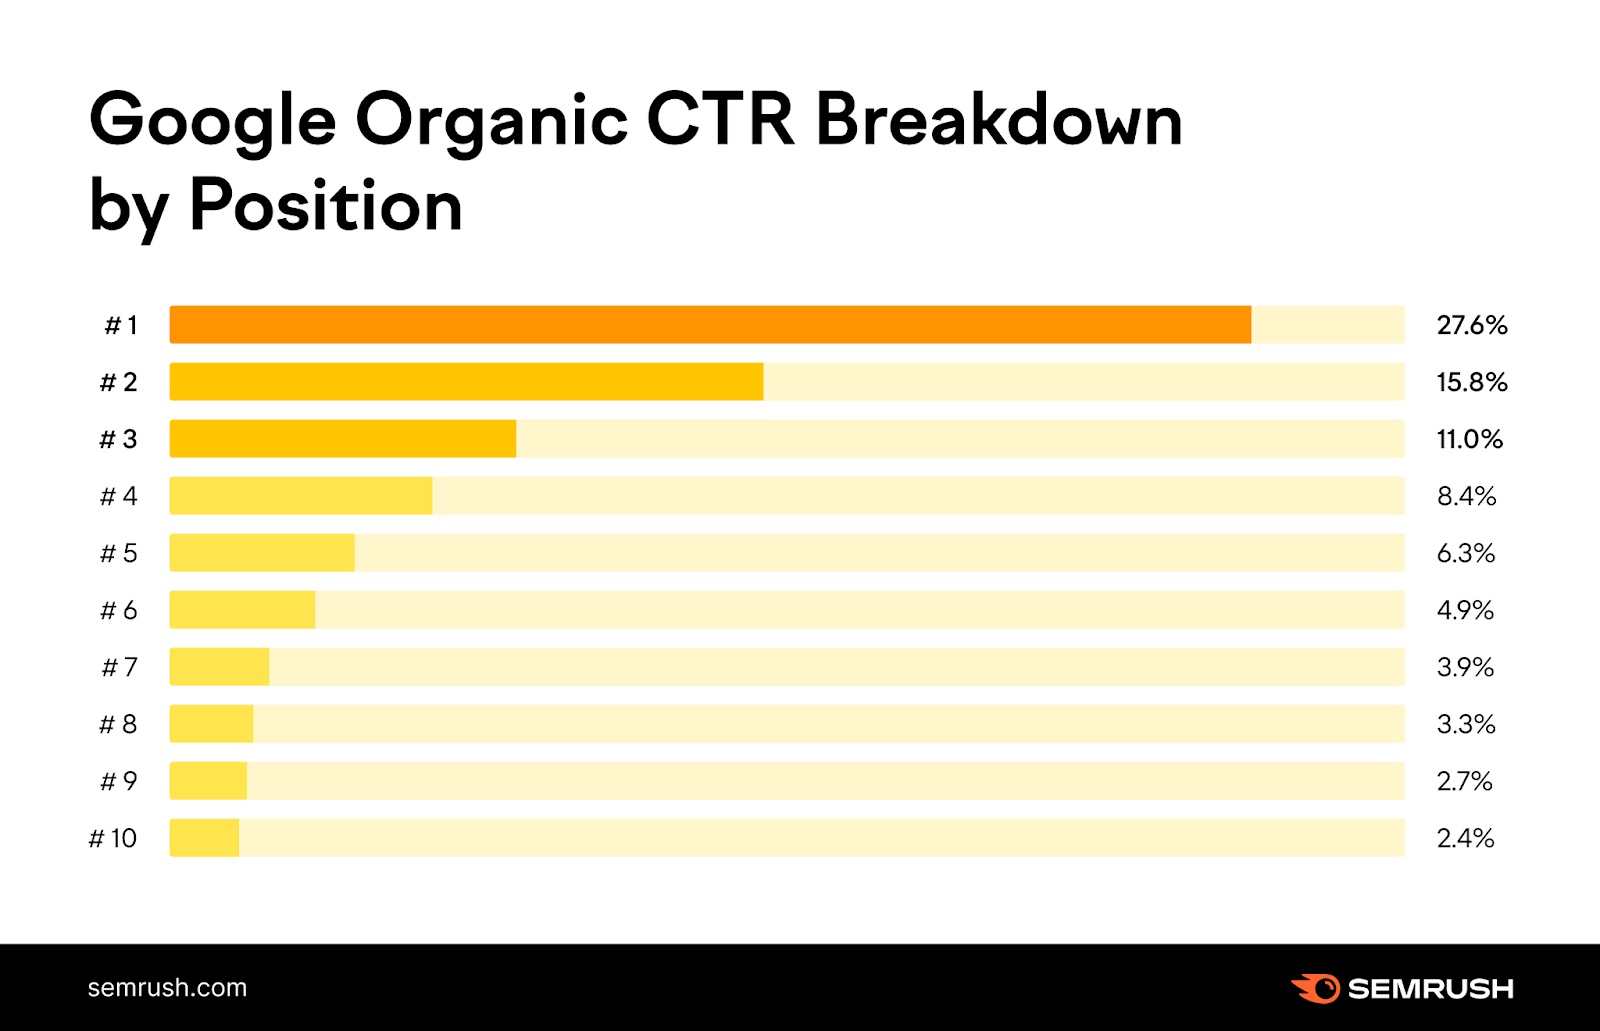 Google integrated  CTR breakdown by position